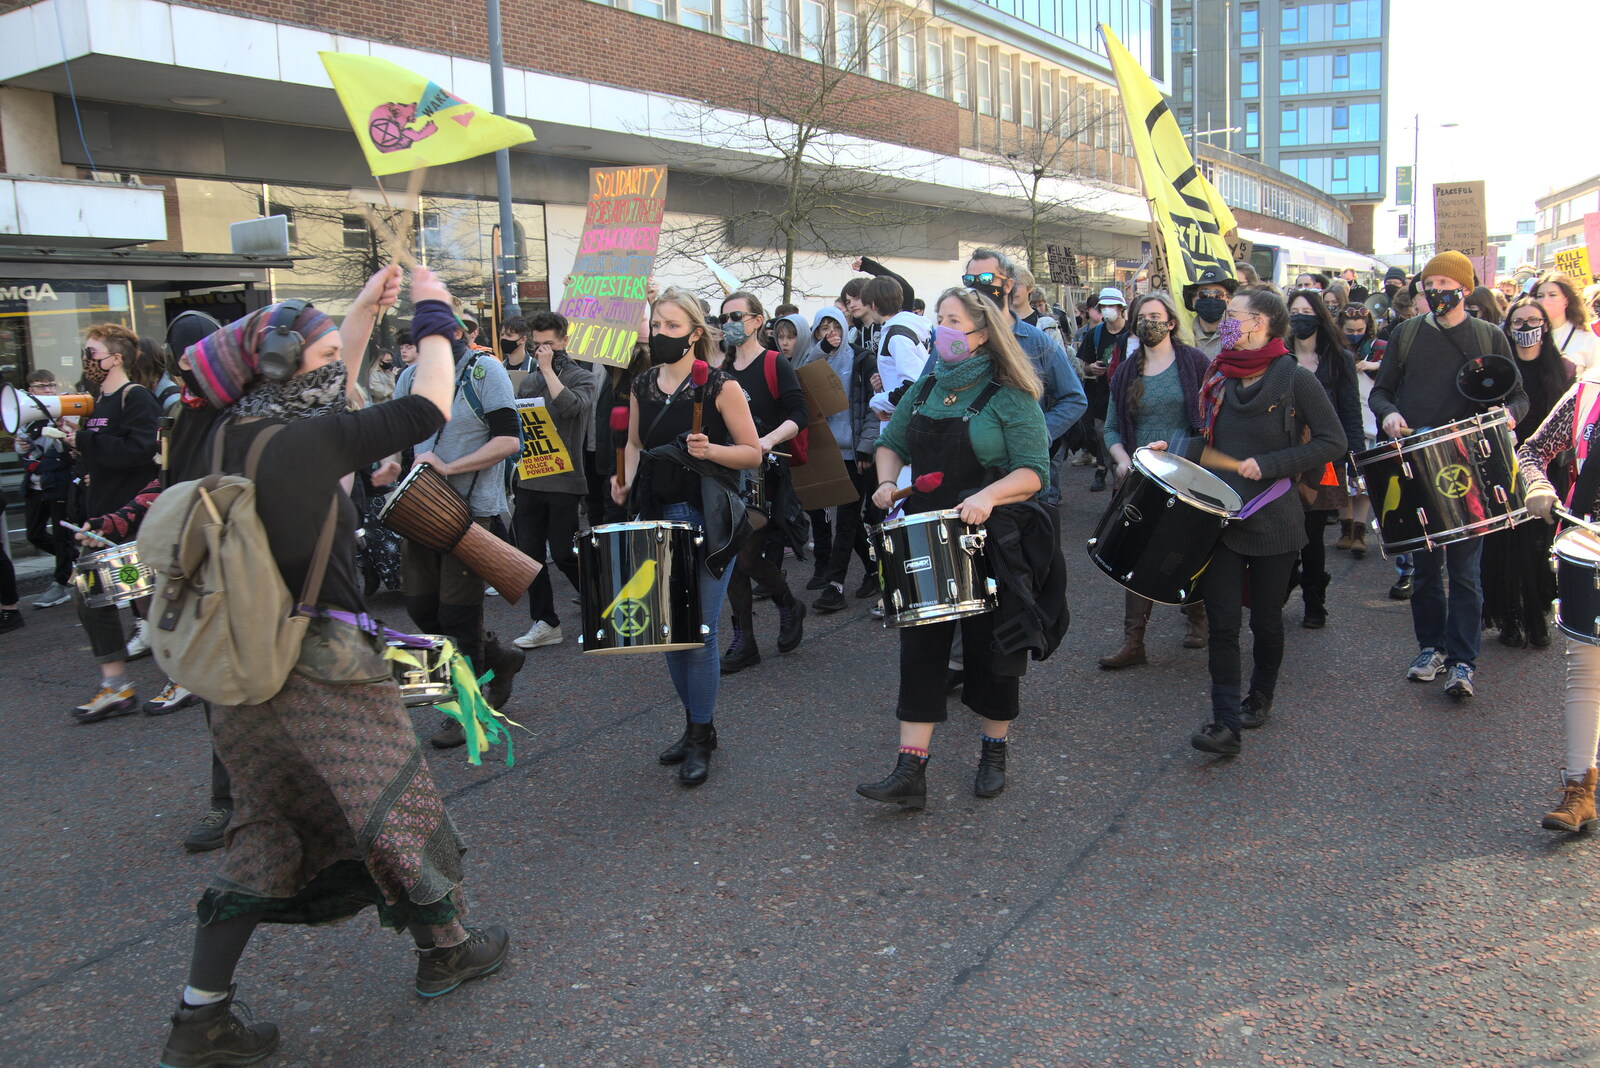 More loud drumming from The Death of Debenhams, Rampant Horse Street, Norwich, Norfolk - 17th April 2021